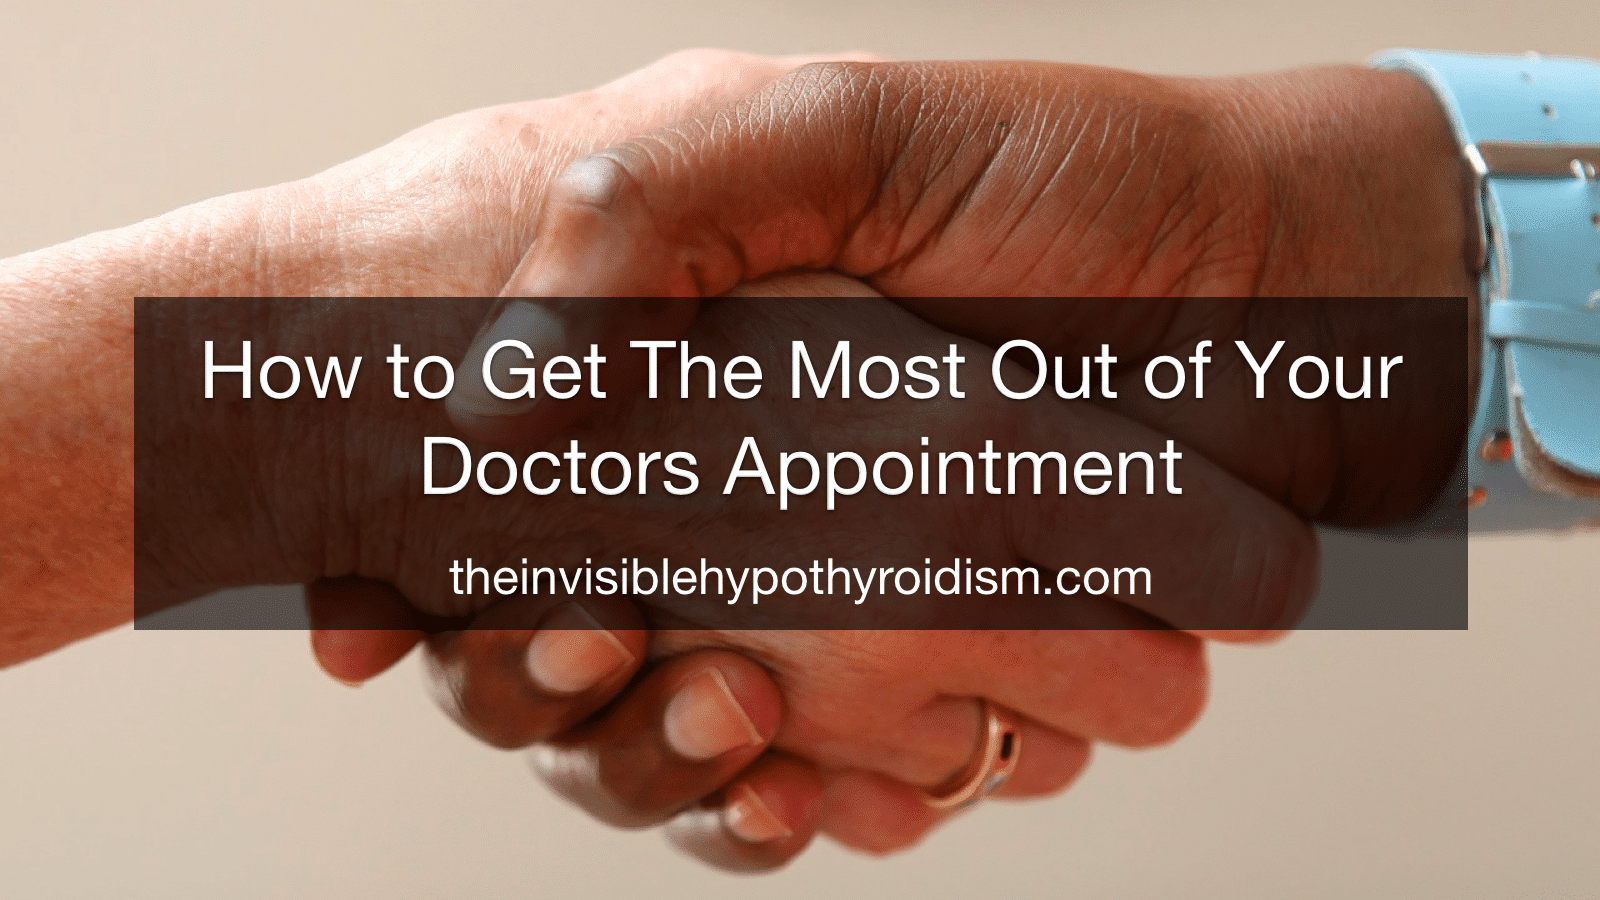 How to Get The Most Out of Your Doctors Appointment